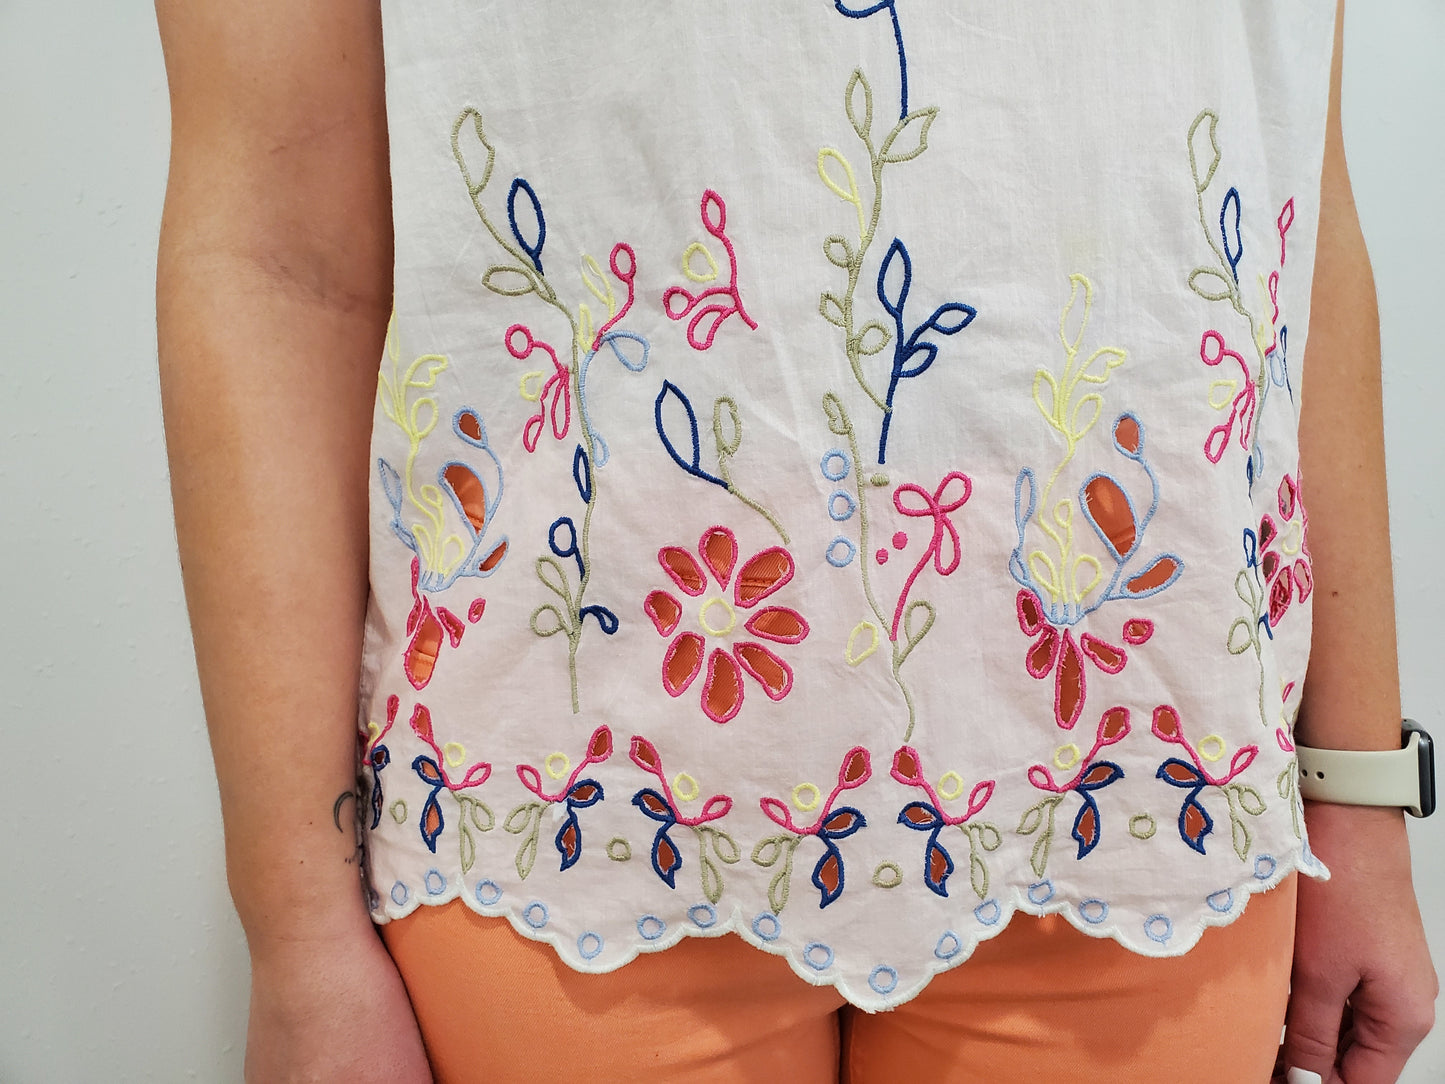 CHARLIE B EMBROIDERED FLORAL TANK - WHITE MULTI